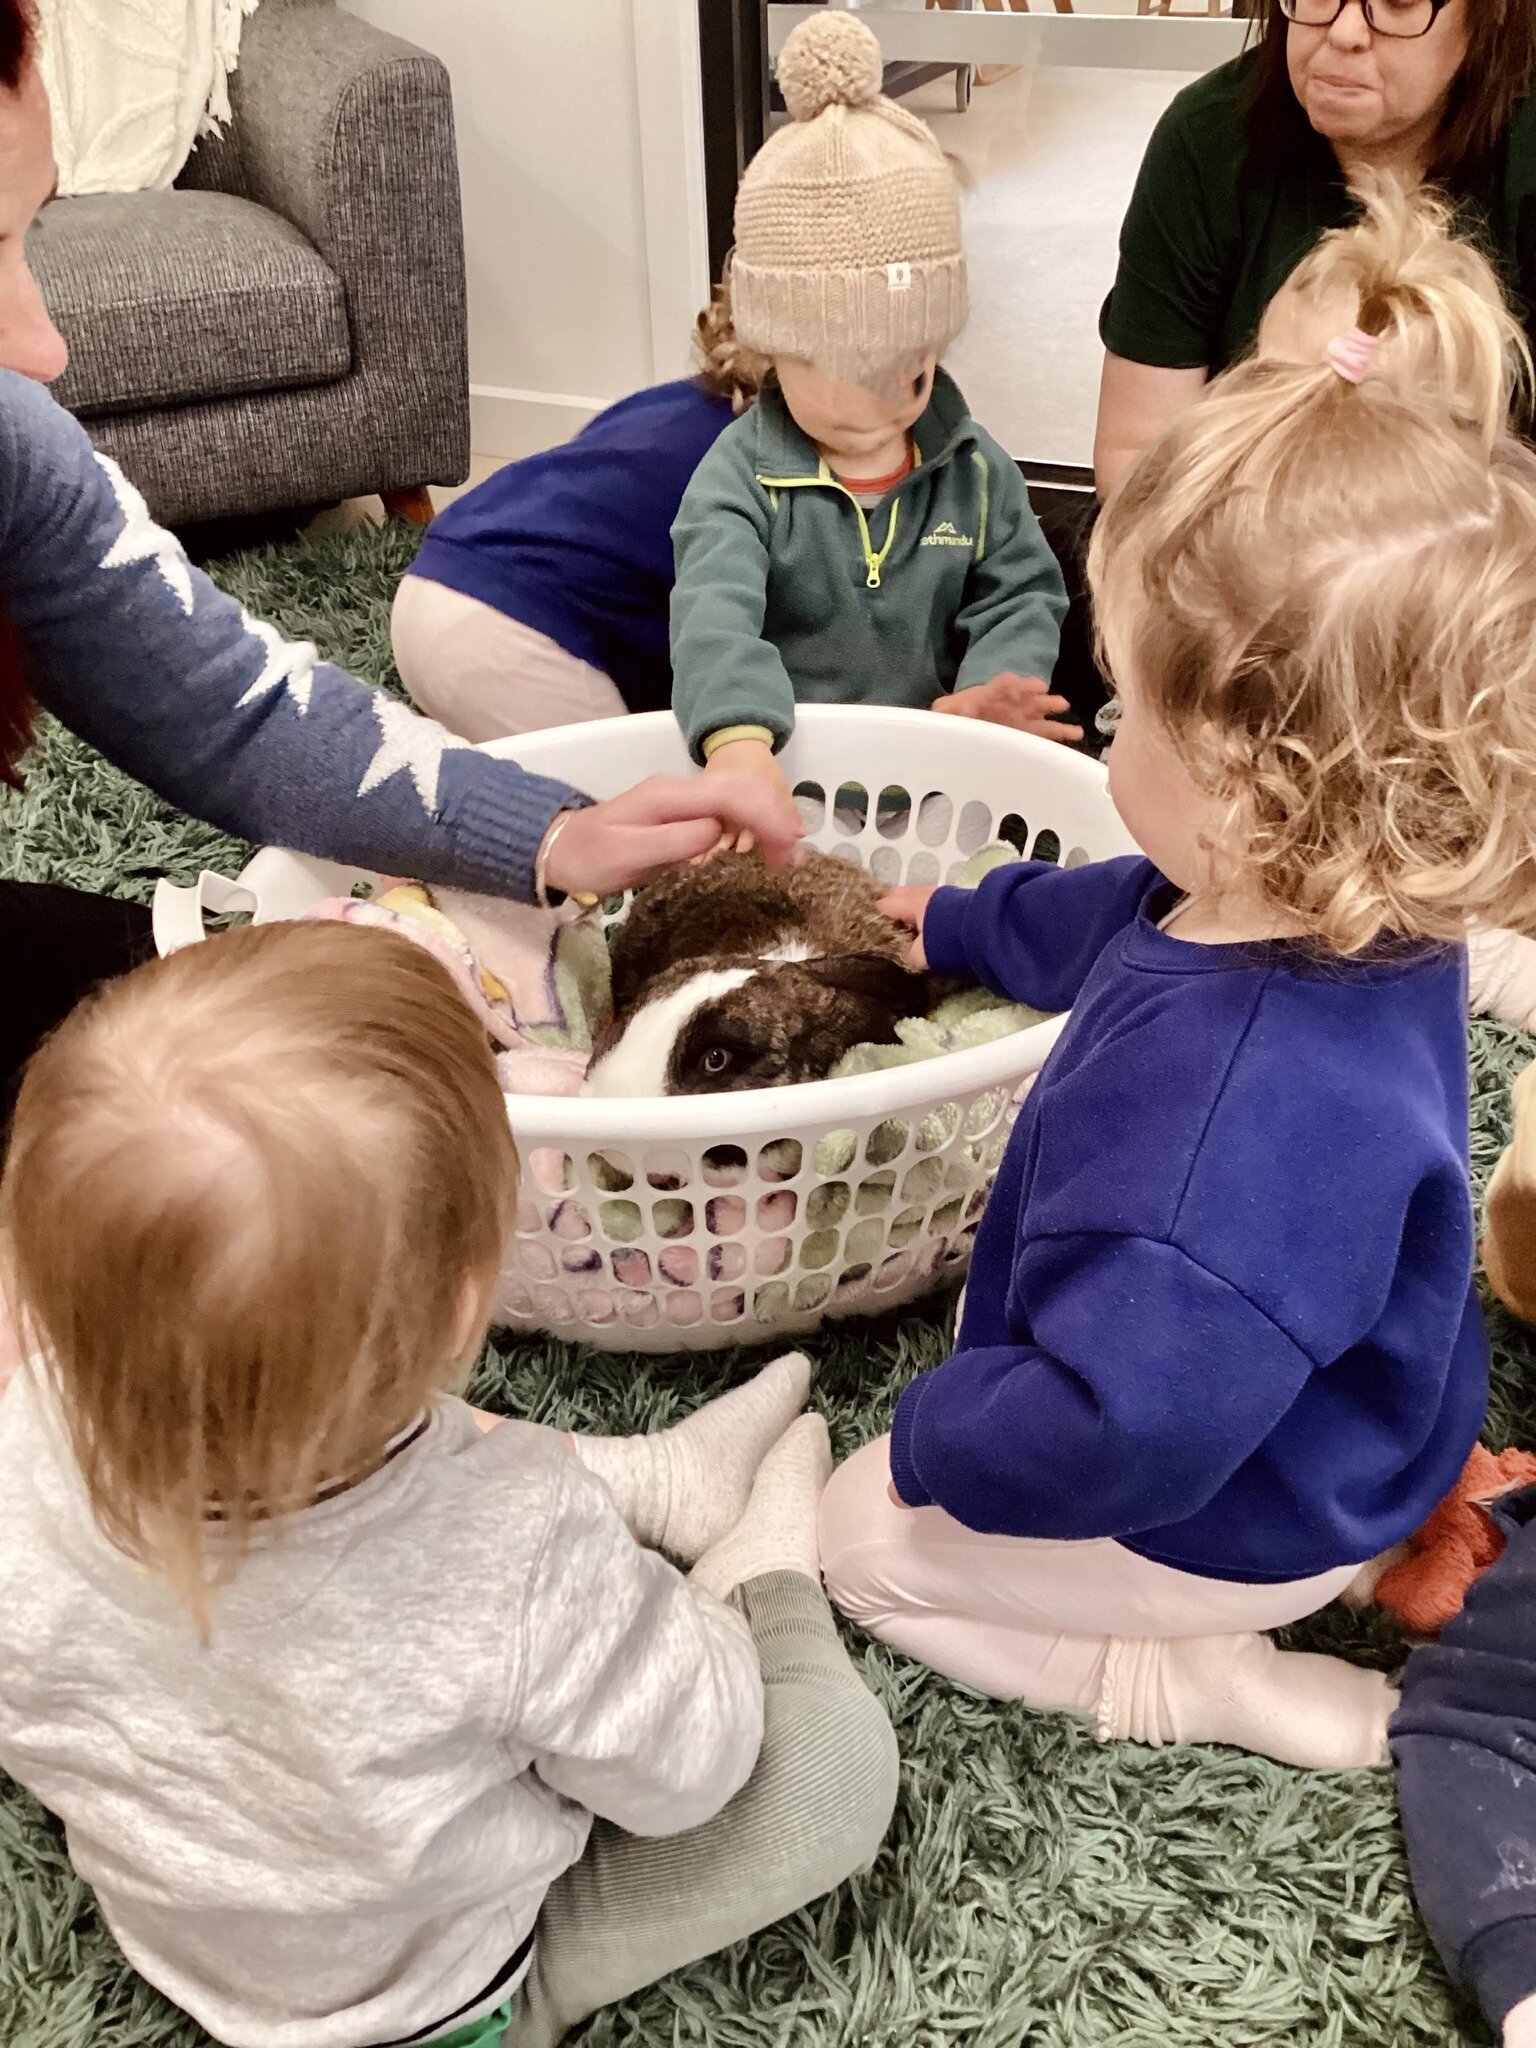 We were very lucky at Hei Schools Ballarat Central today to receive a visit from Fluffy, Peter and Alisha's giant pet bunny.  The children were amazing with the size of him and loved how soft his coat was.  Many thanks to Stacey for bringing him in. 